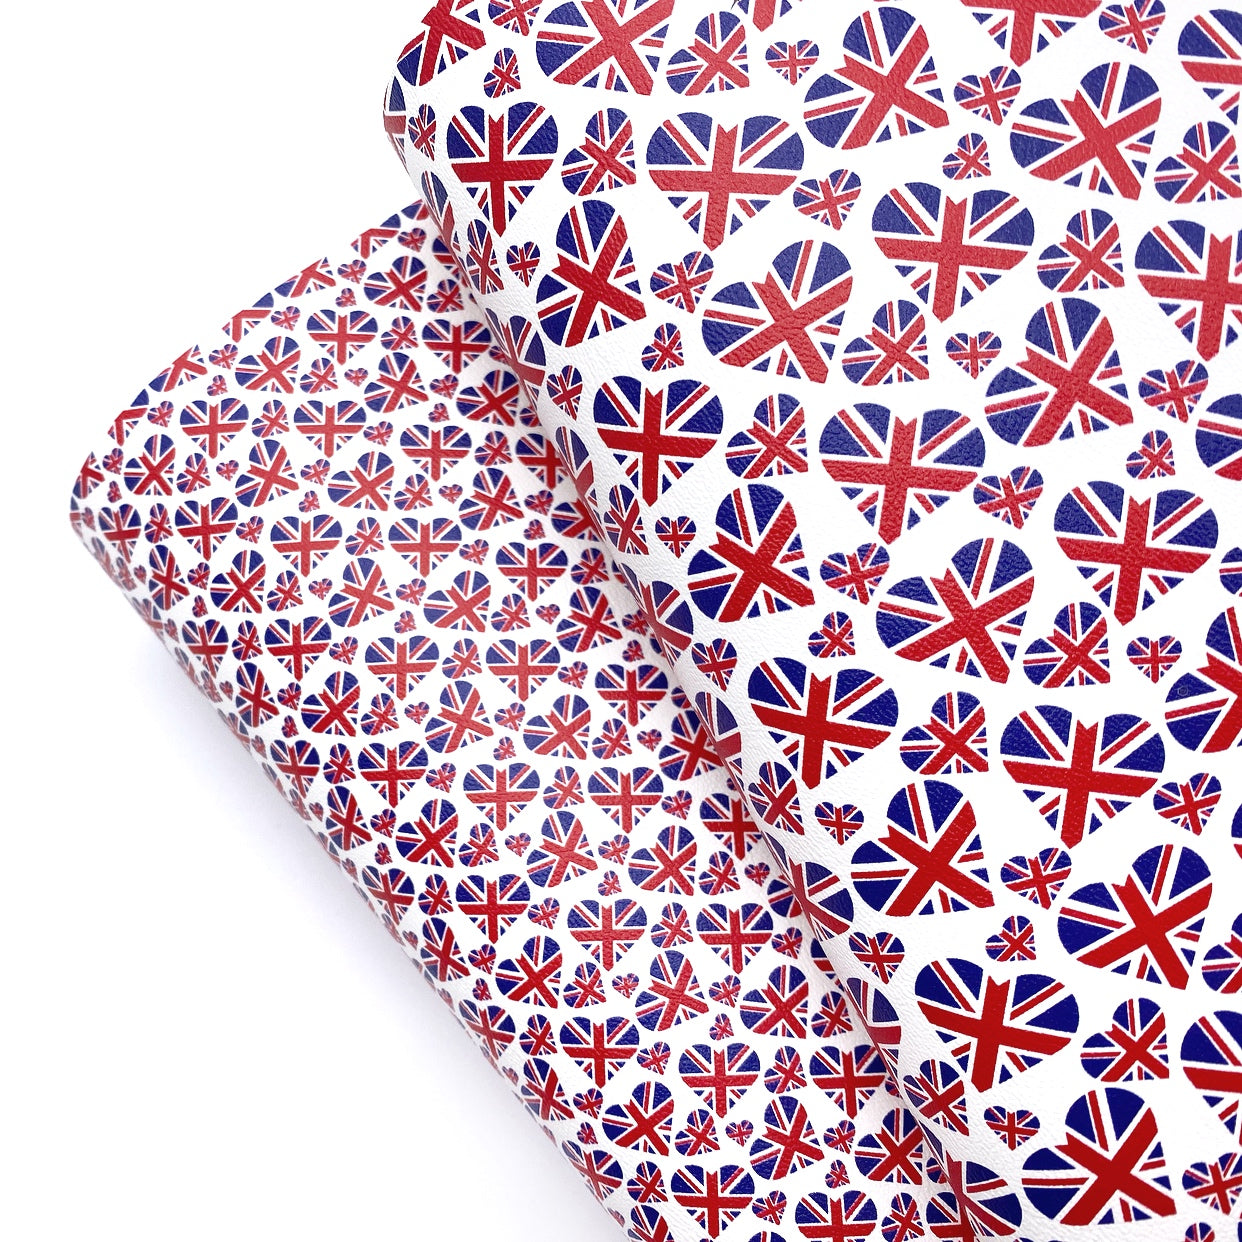 We Love the UK Heart Union Jack Premium Faux Leather Fabric Sheets